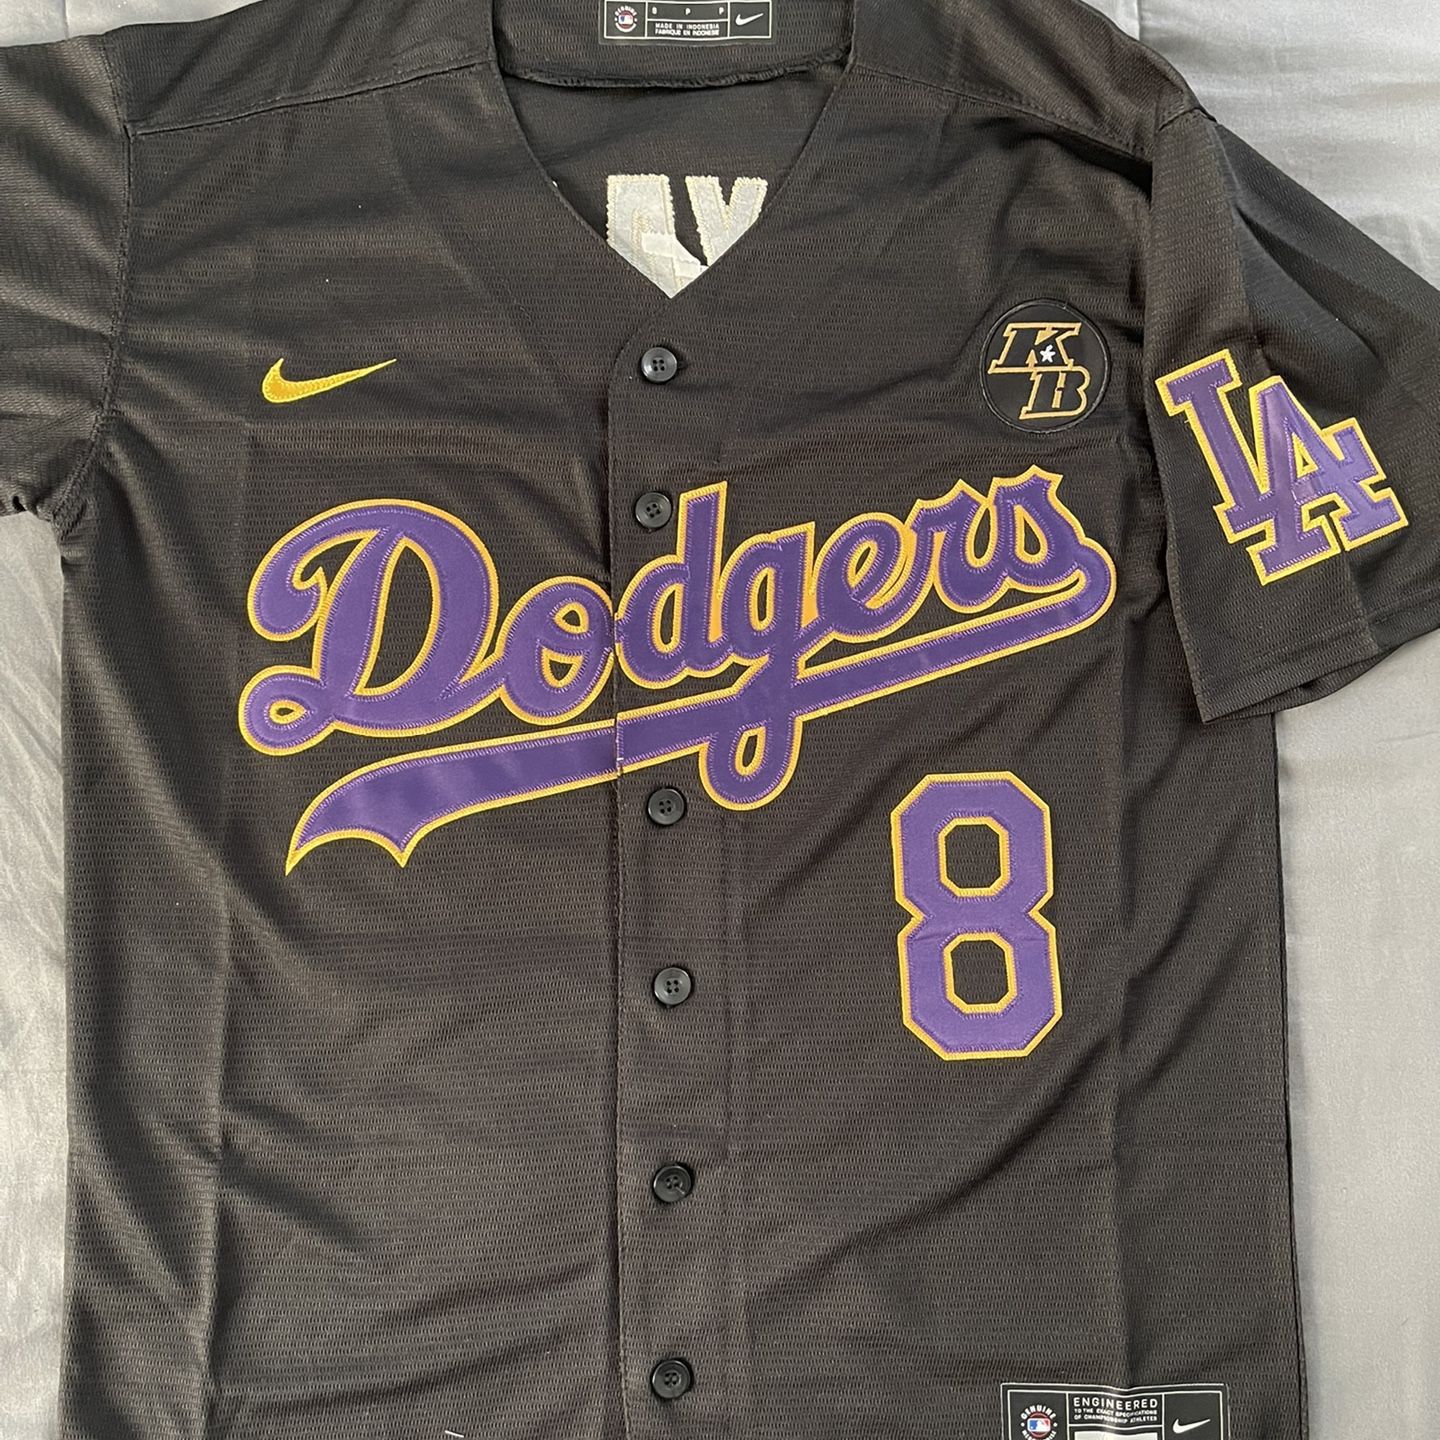 NIKE LOS ANGELS LAKERS #8 K.BYRANT WISH JERSEY AV3696-504 MENS SIZE (48)  LARGE for Sale in Queens, NY - OfferUp